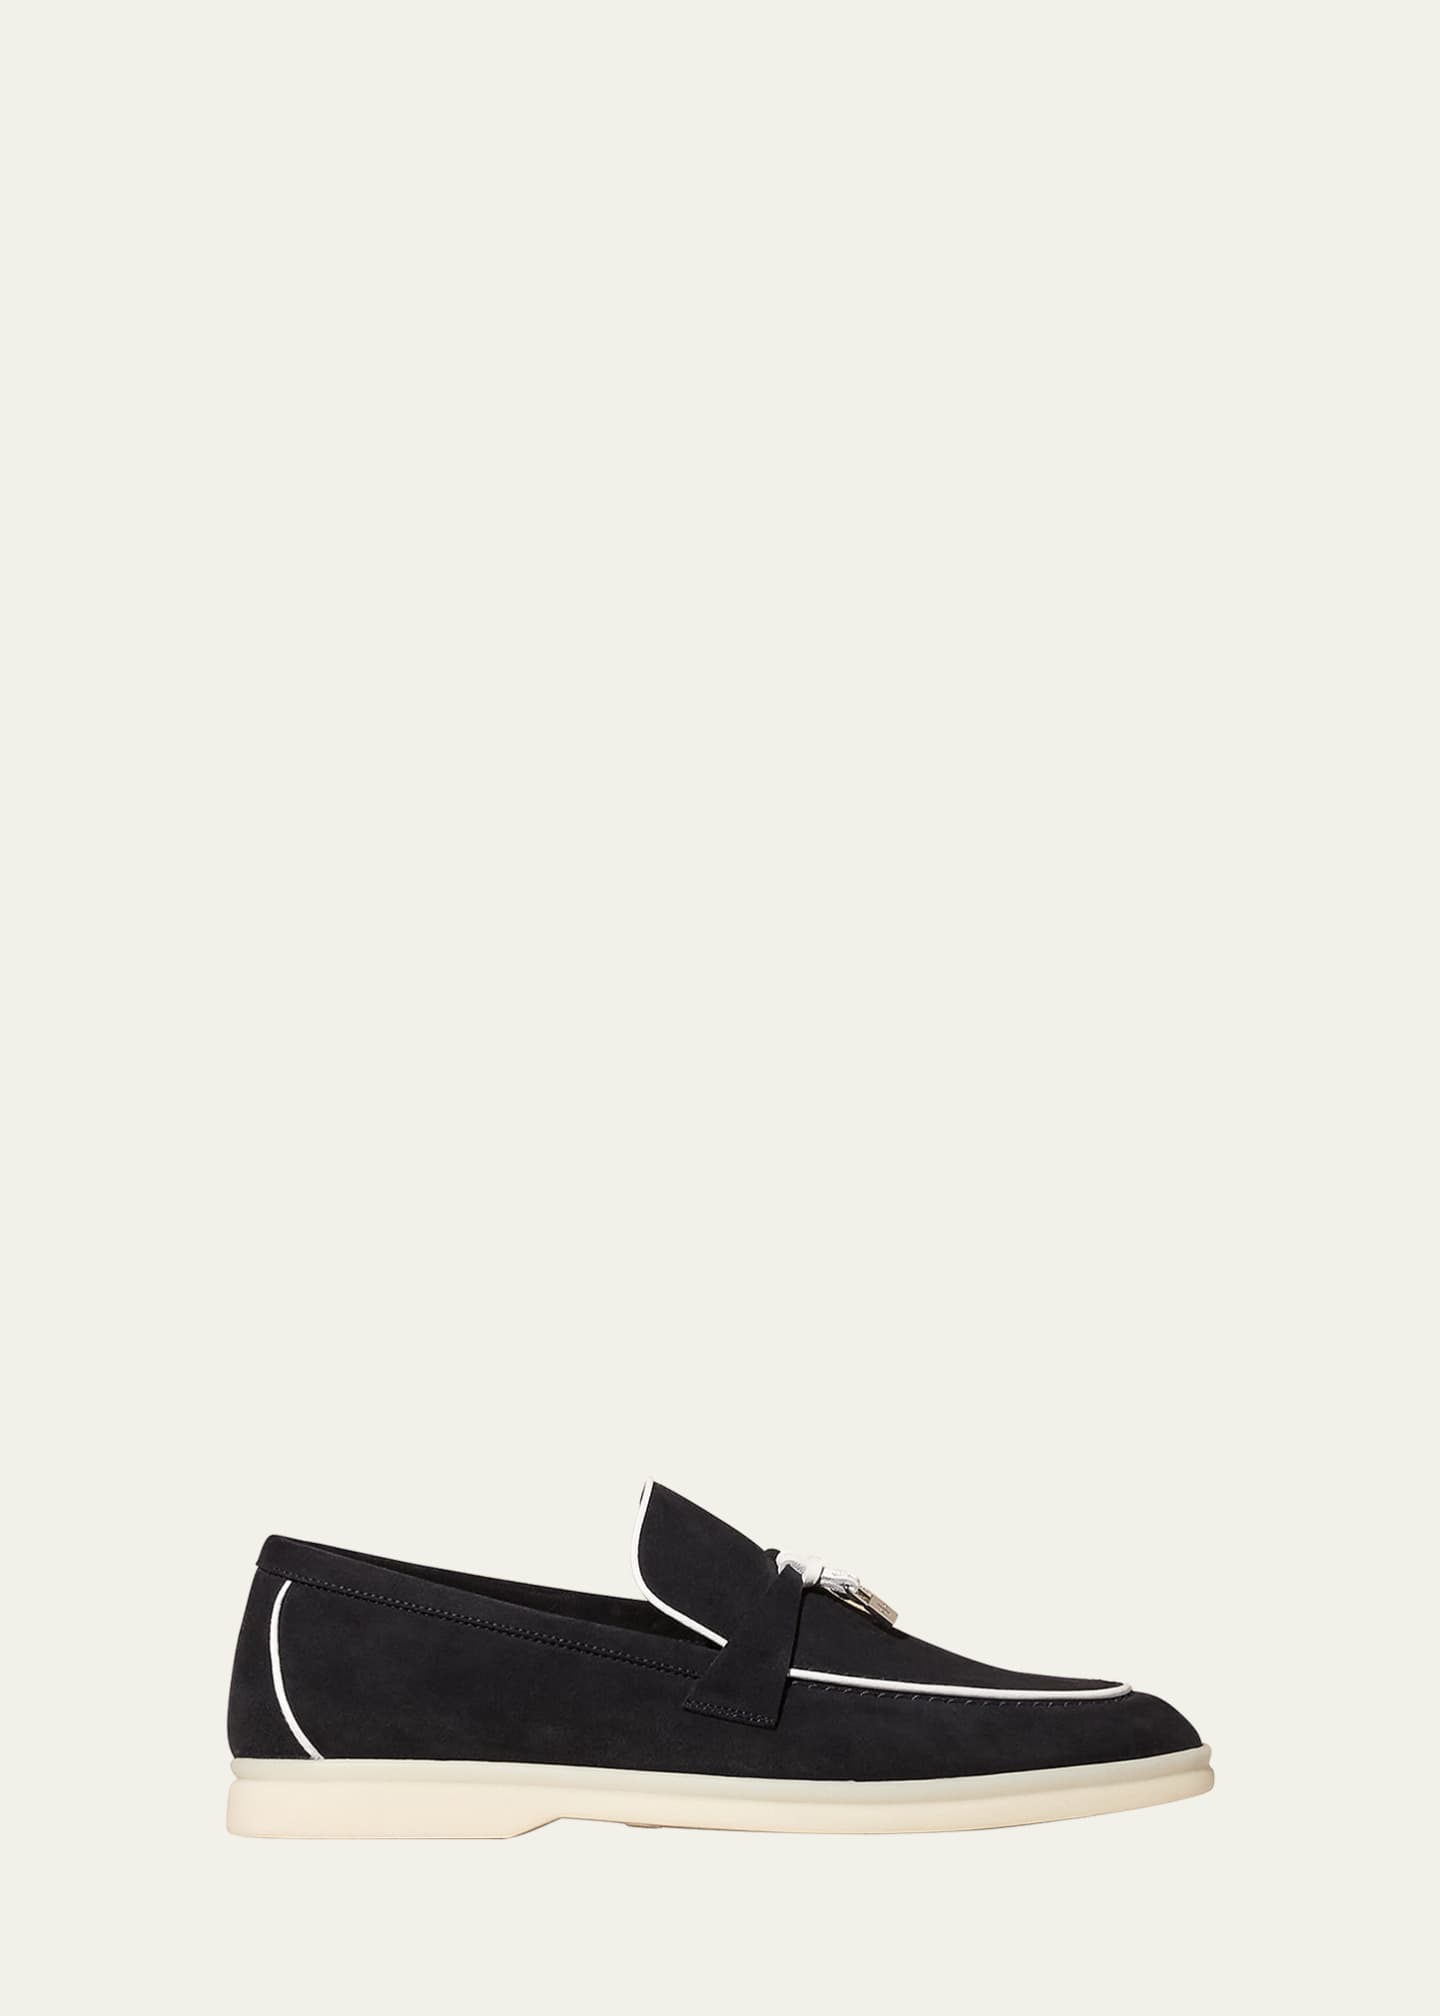 Loro Piana Summer Suede Charms Loafers - Bergdorf Goodman